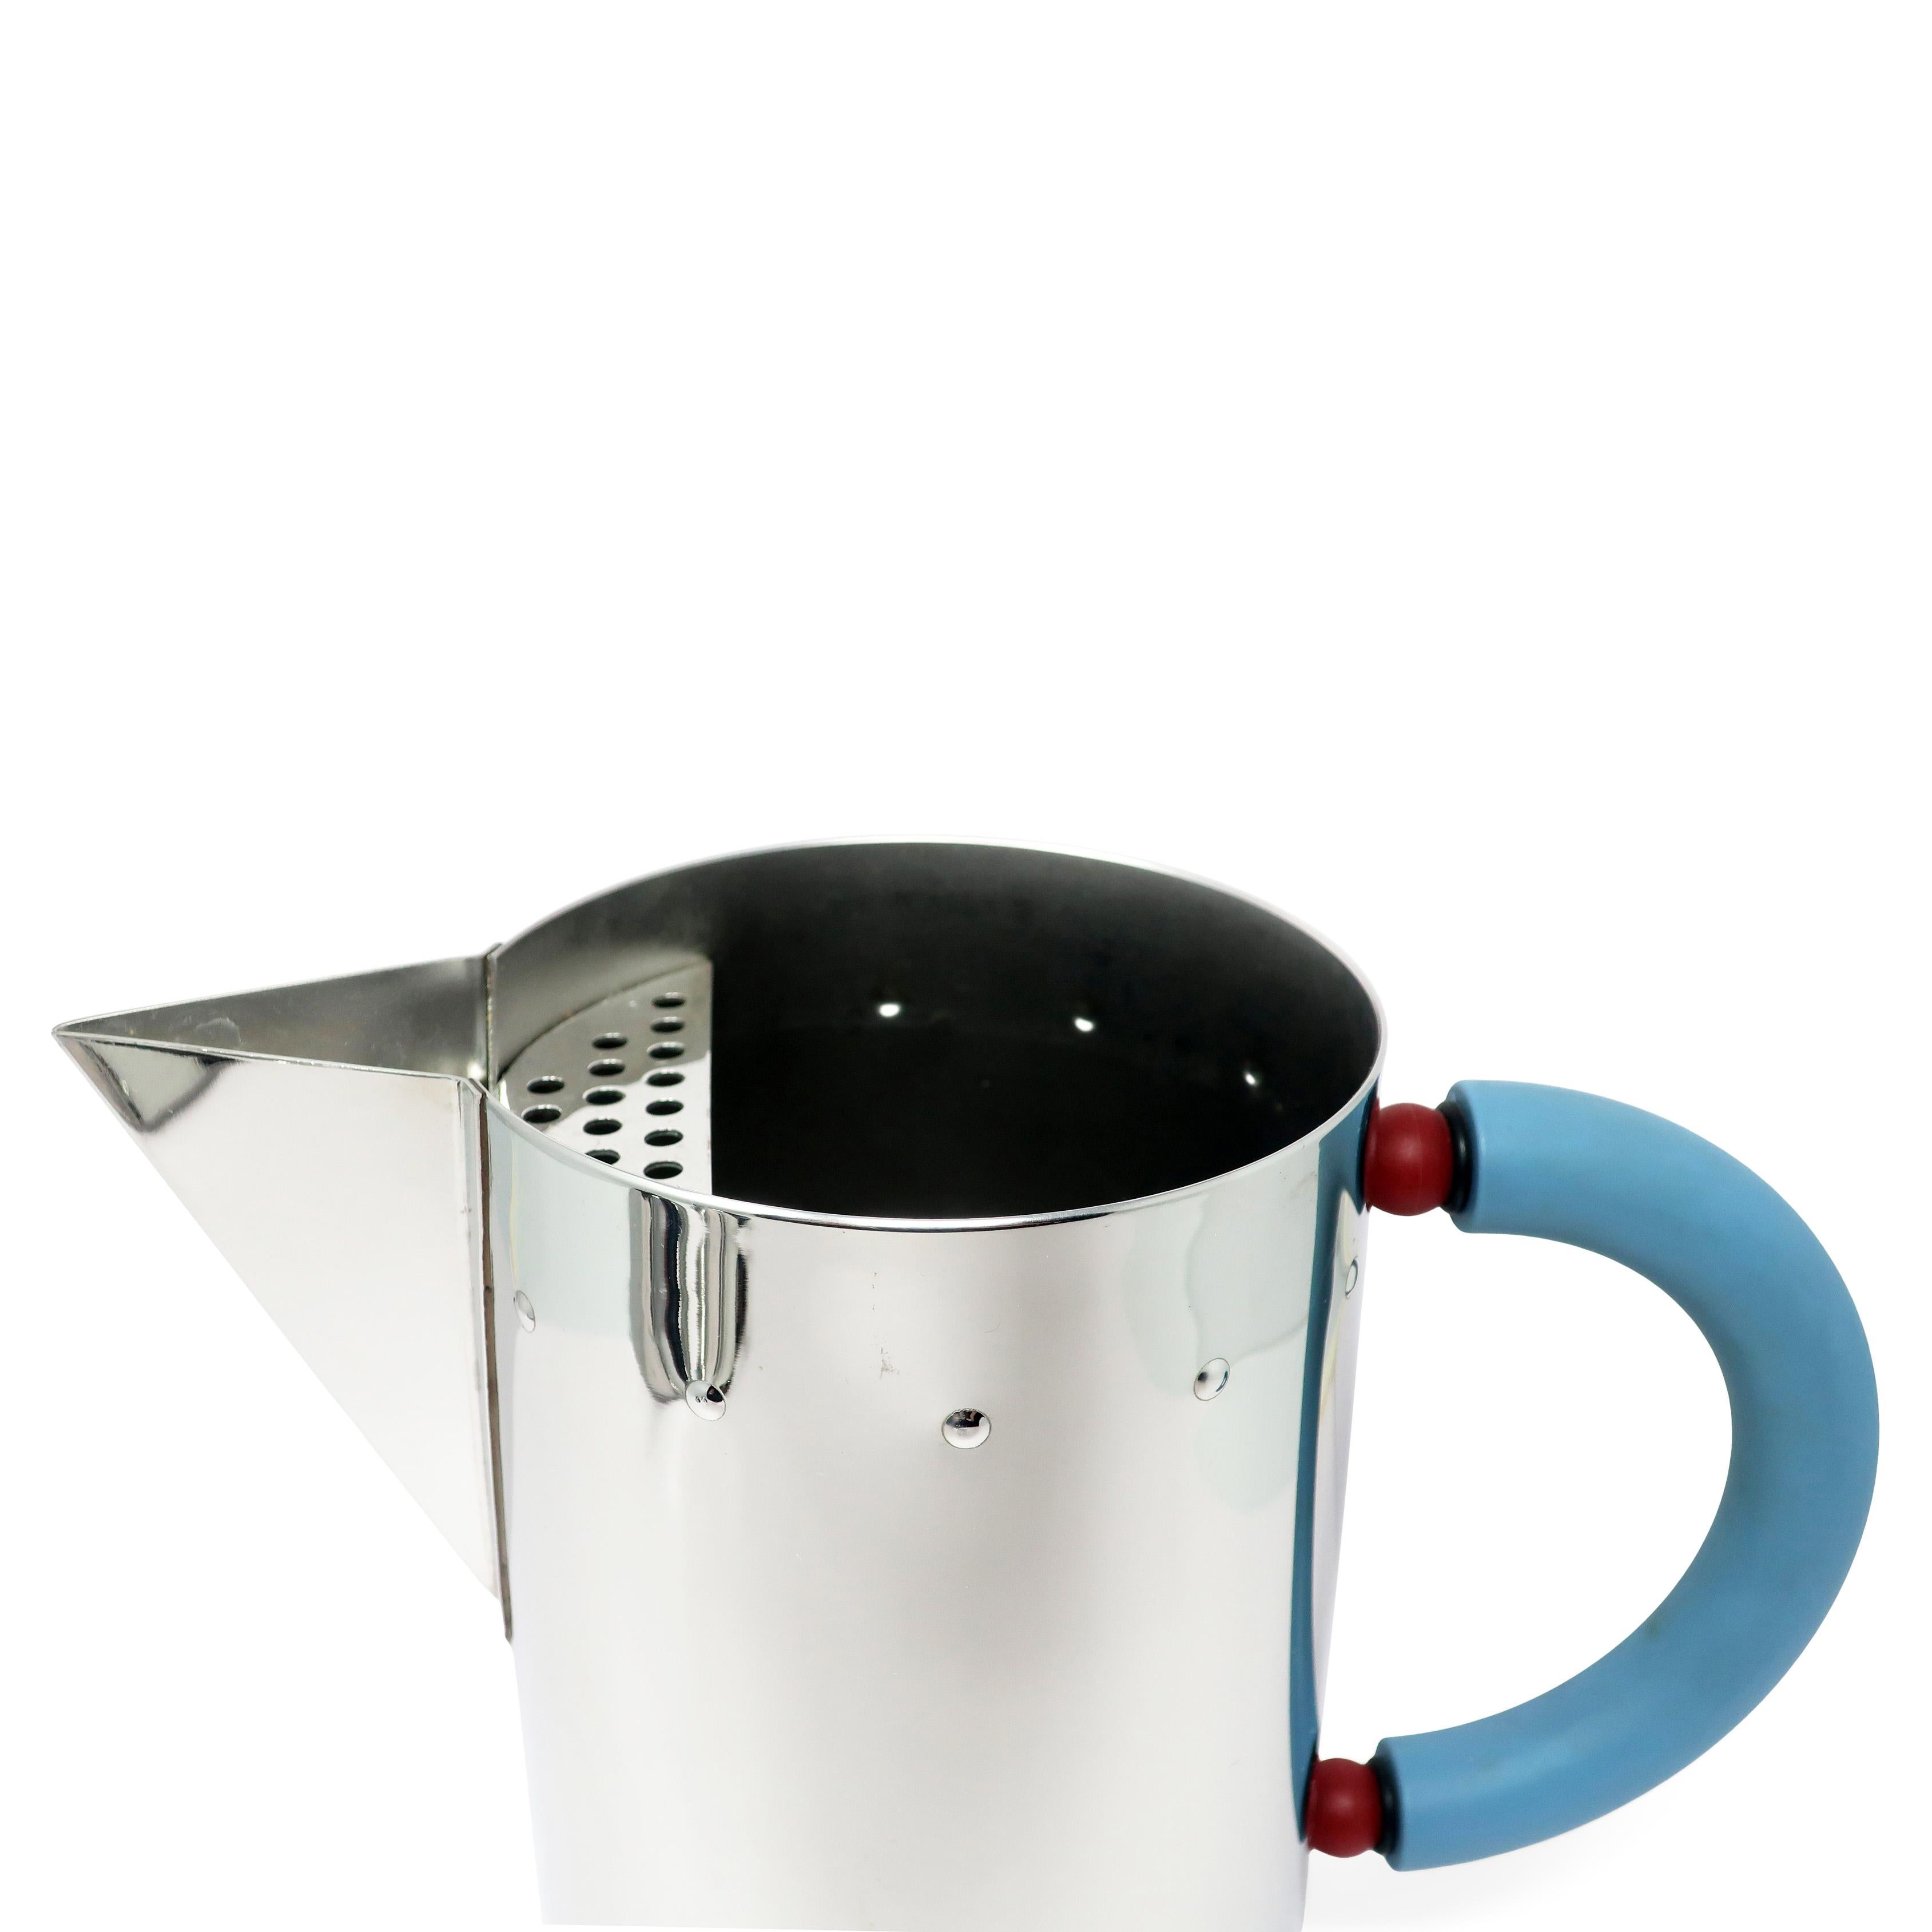 Stainless Pitcher, Creamer and Sugar by Michael Graves for Alessi 1